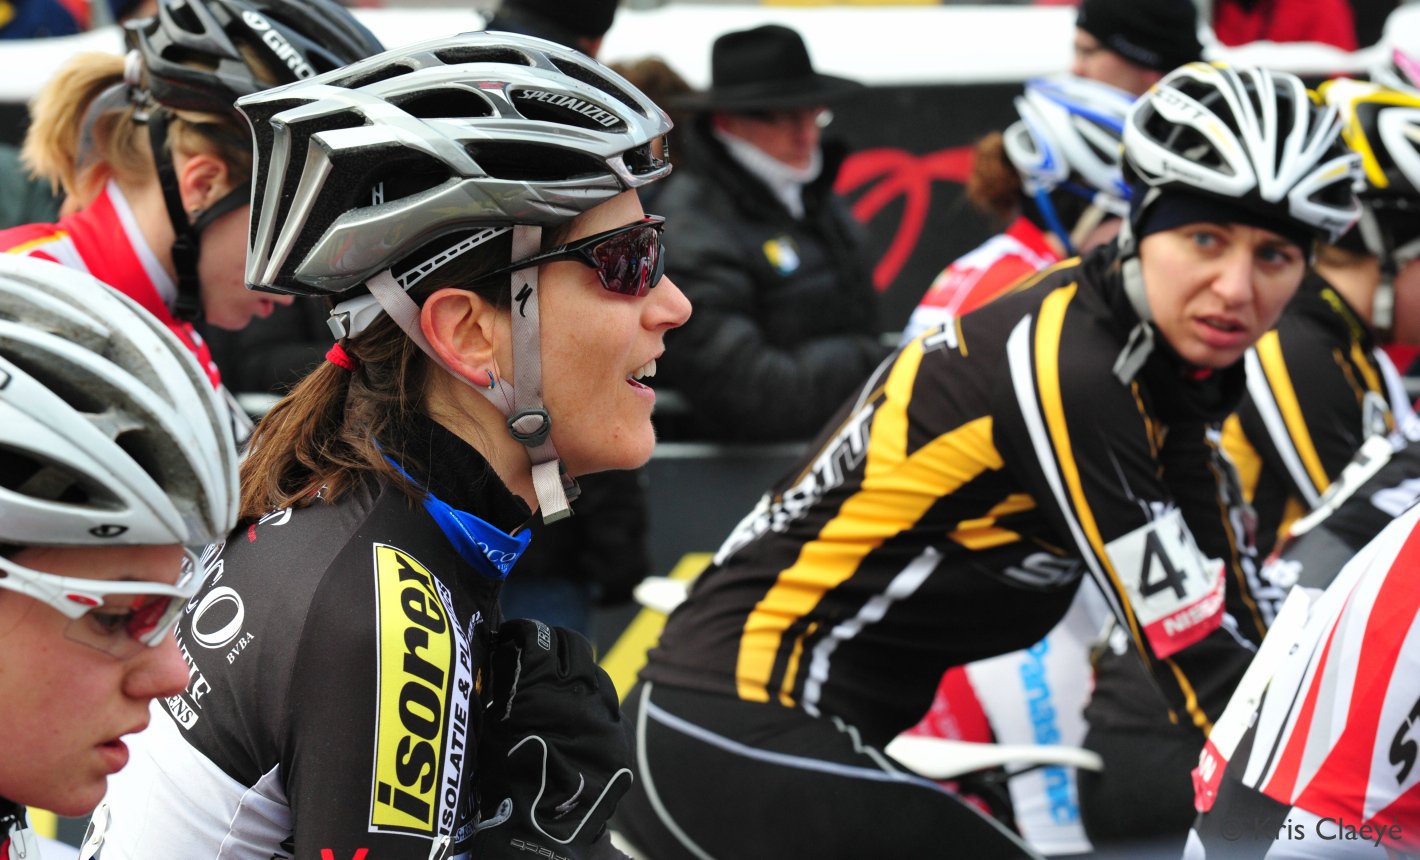 Looking optimistic at the start line in Zolder ©Kris Claeye